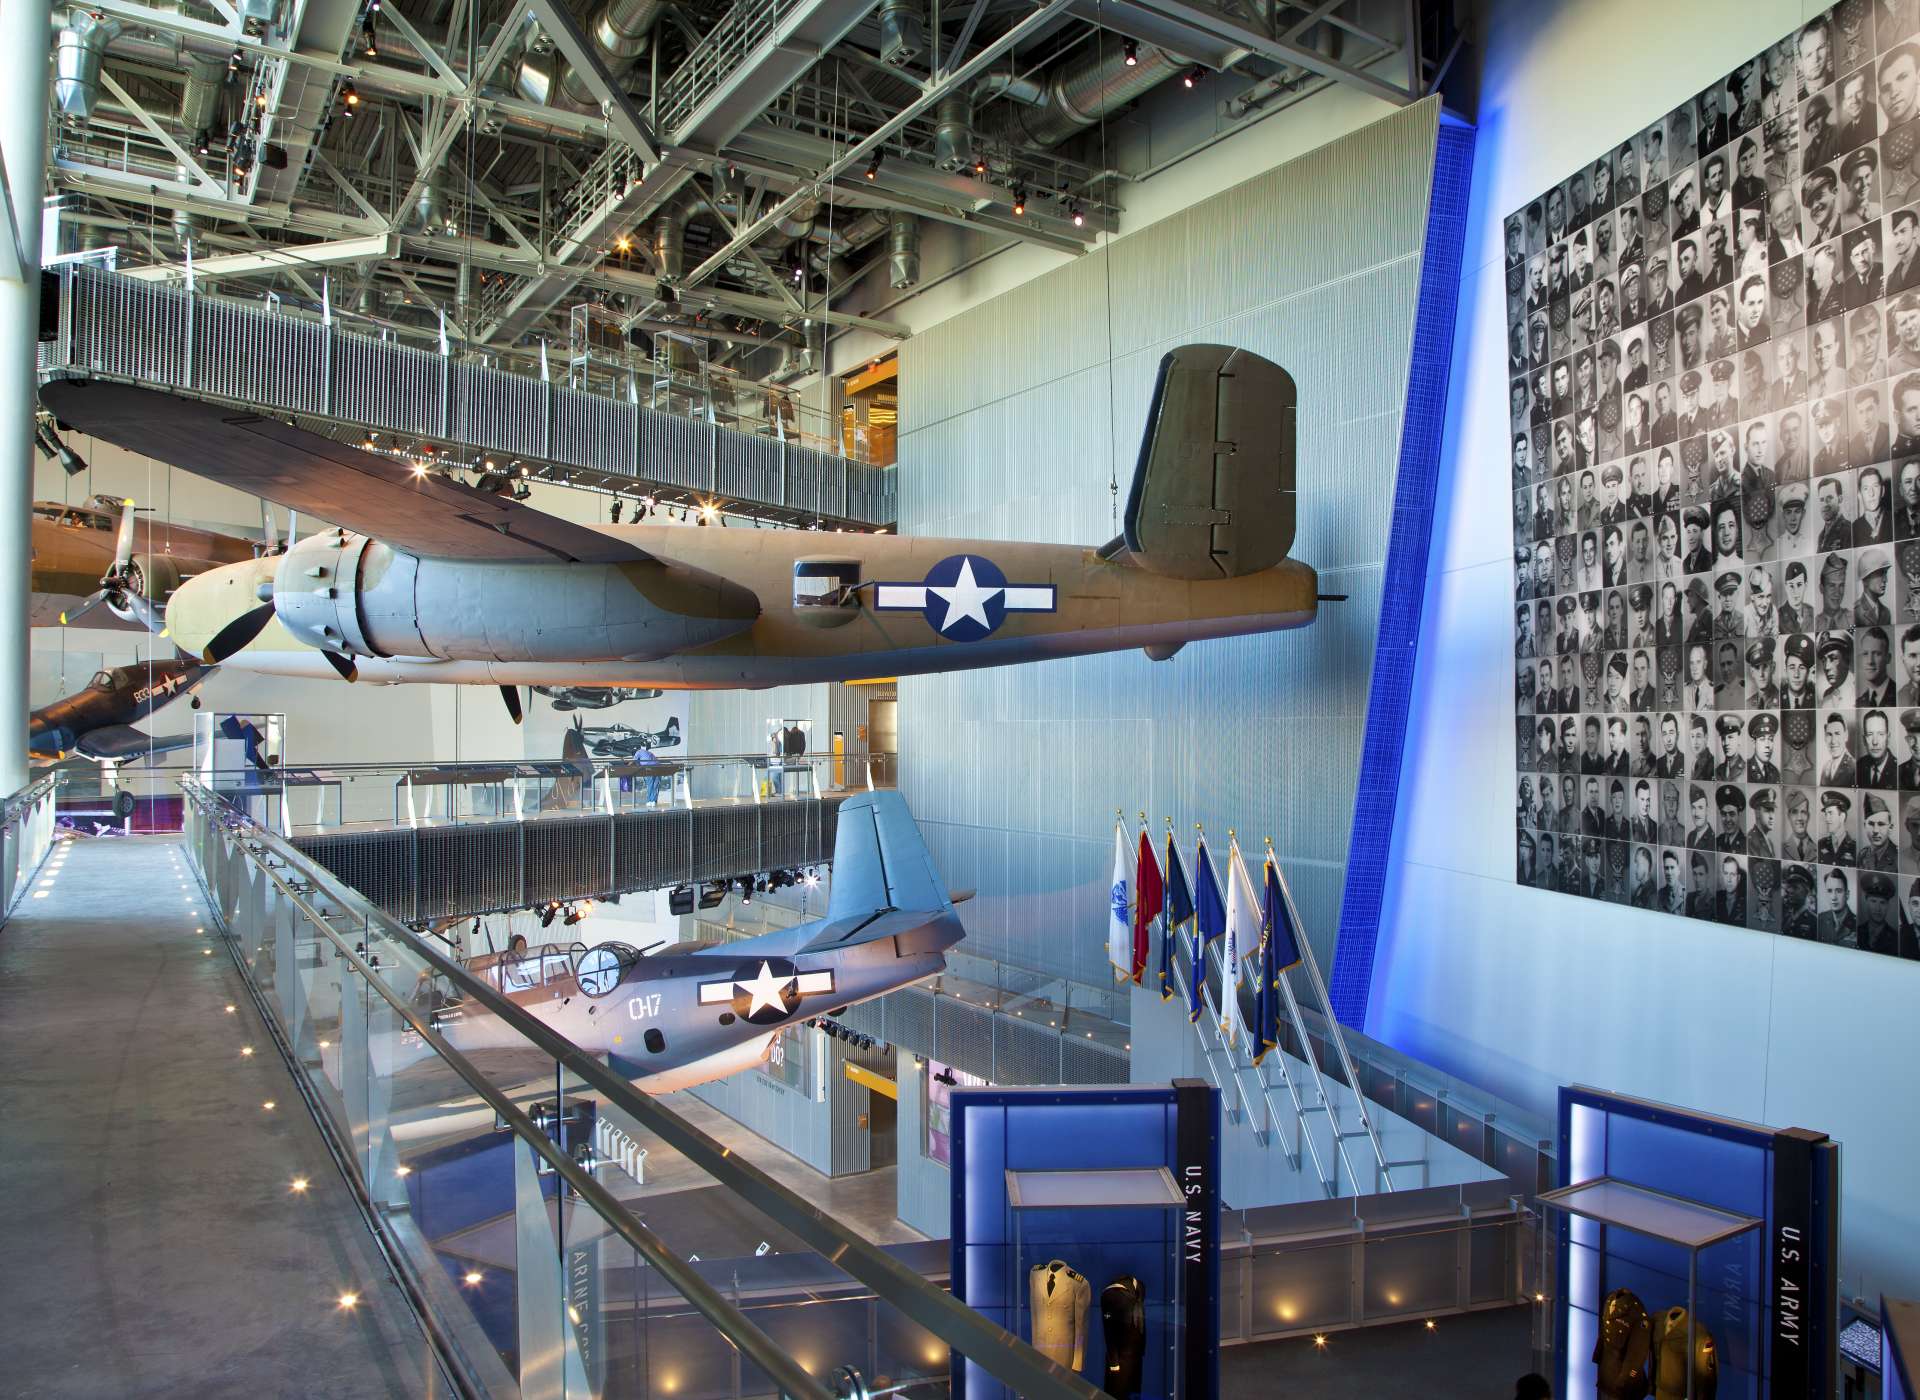 Aircraft in US Freedom Pavilion: The Boeing Center